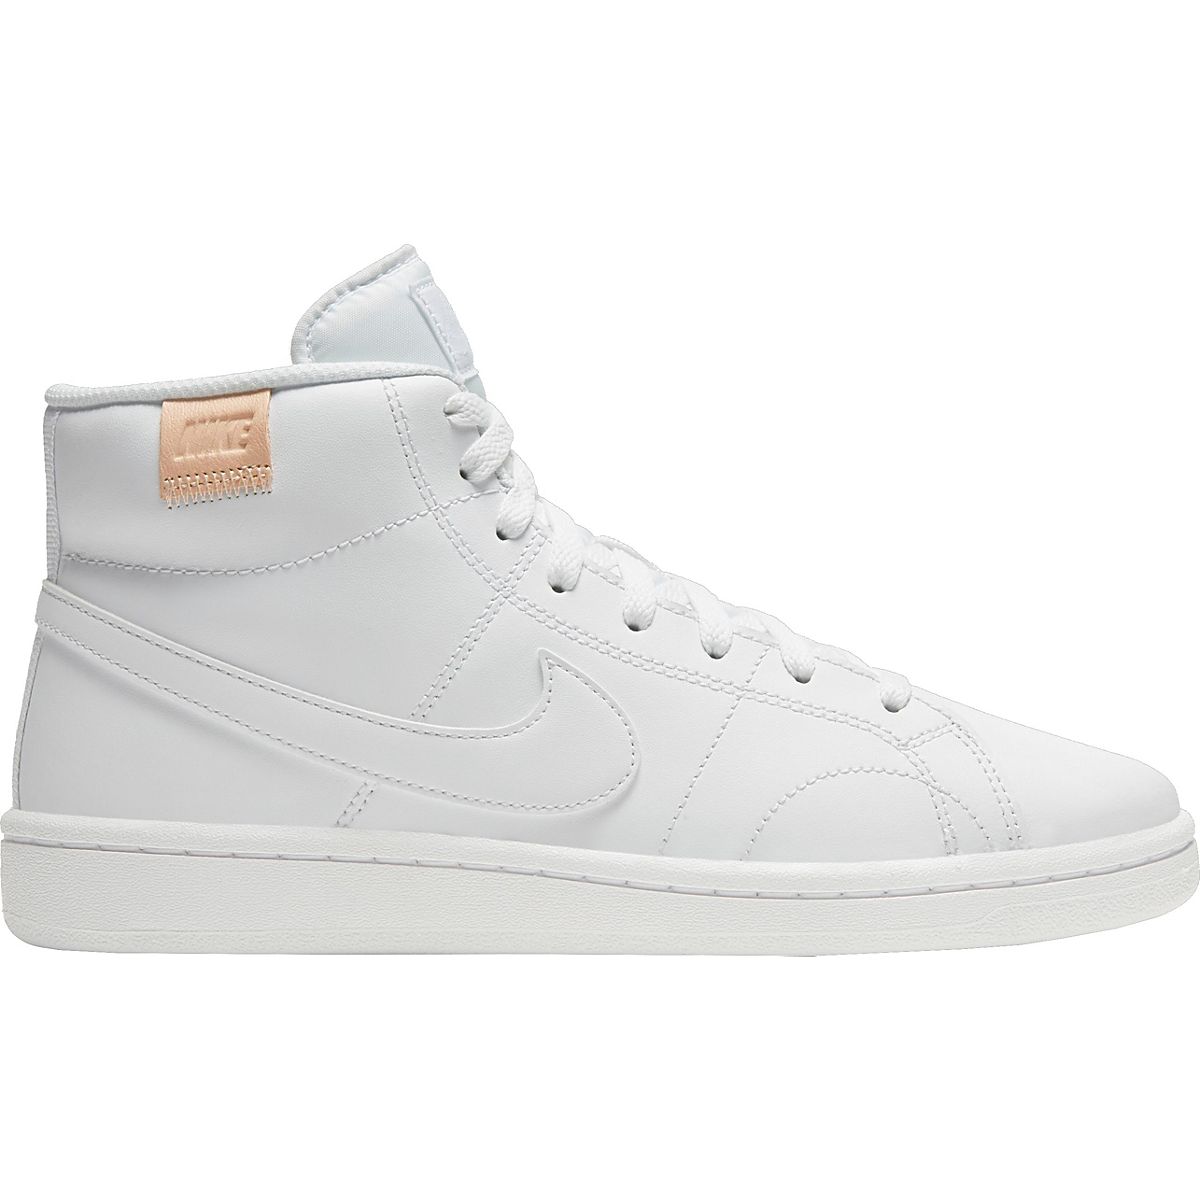 Nike Women's Court Royale 2 Mid Shoes | Academy